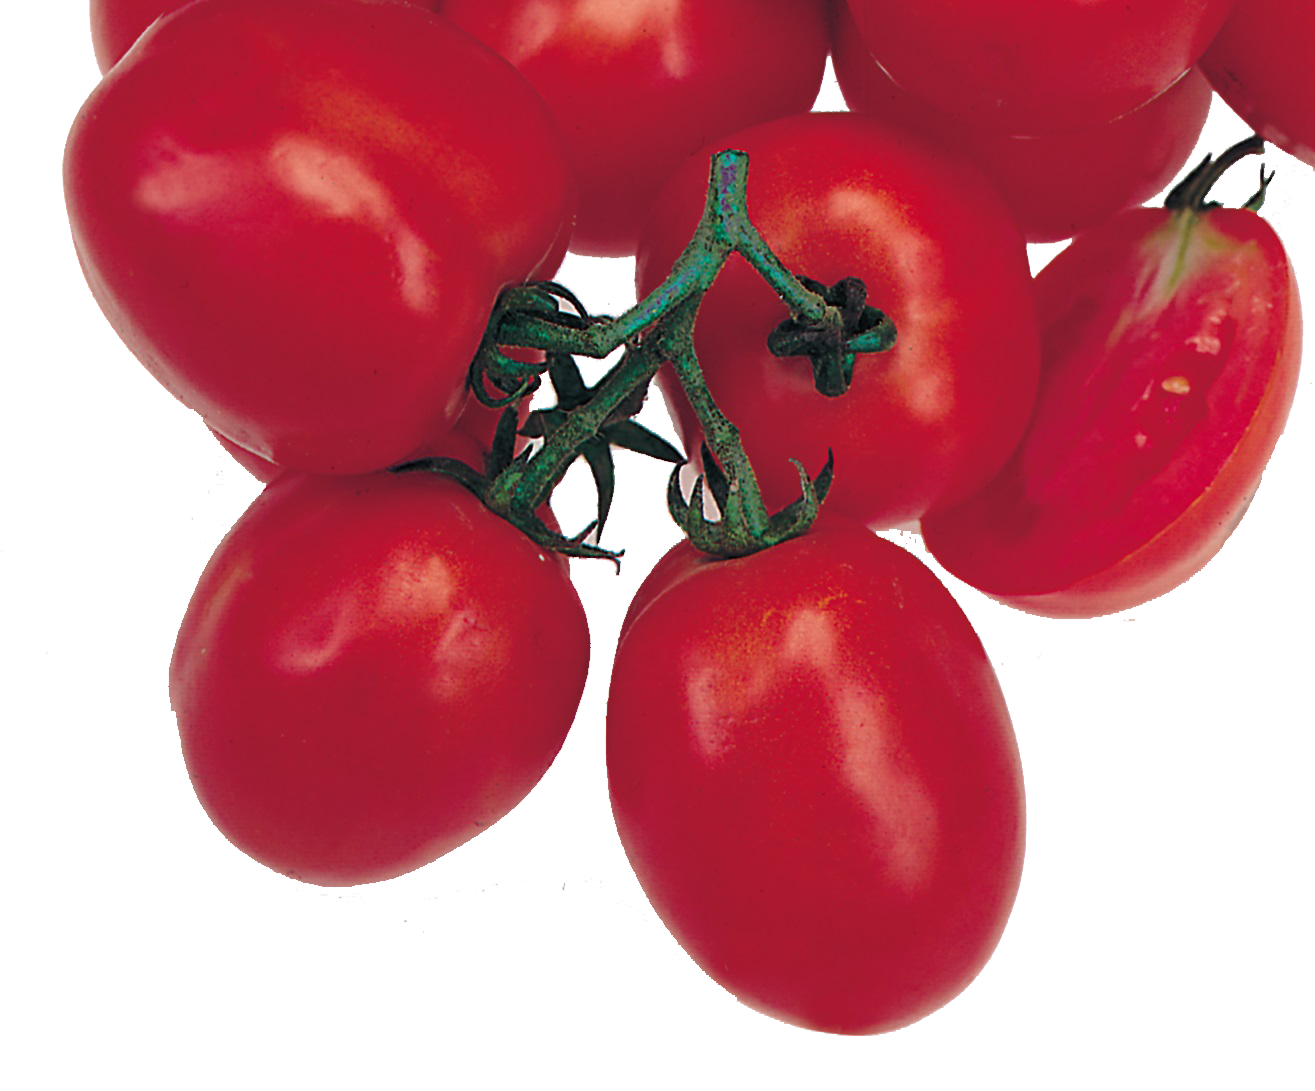 Only tomato tomato variety from Royal Seed